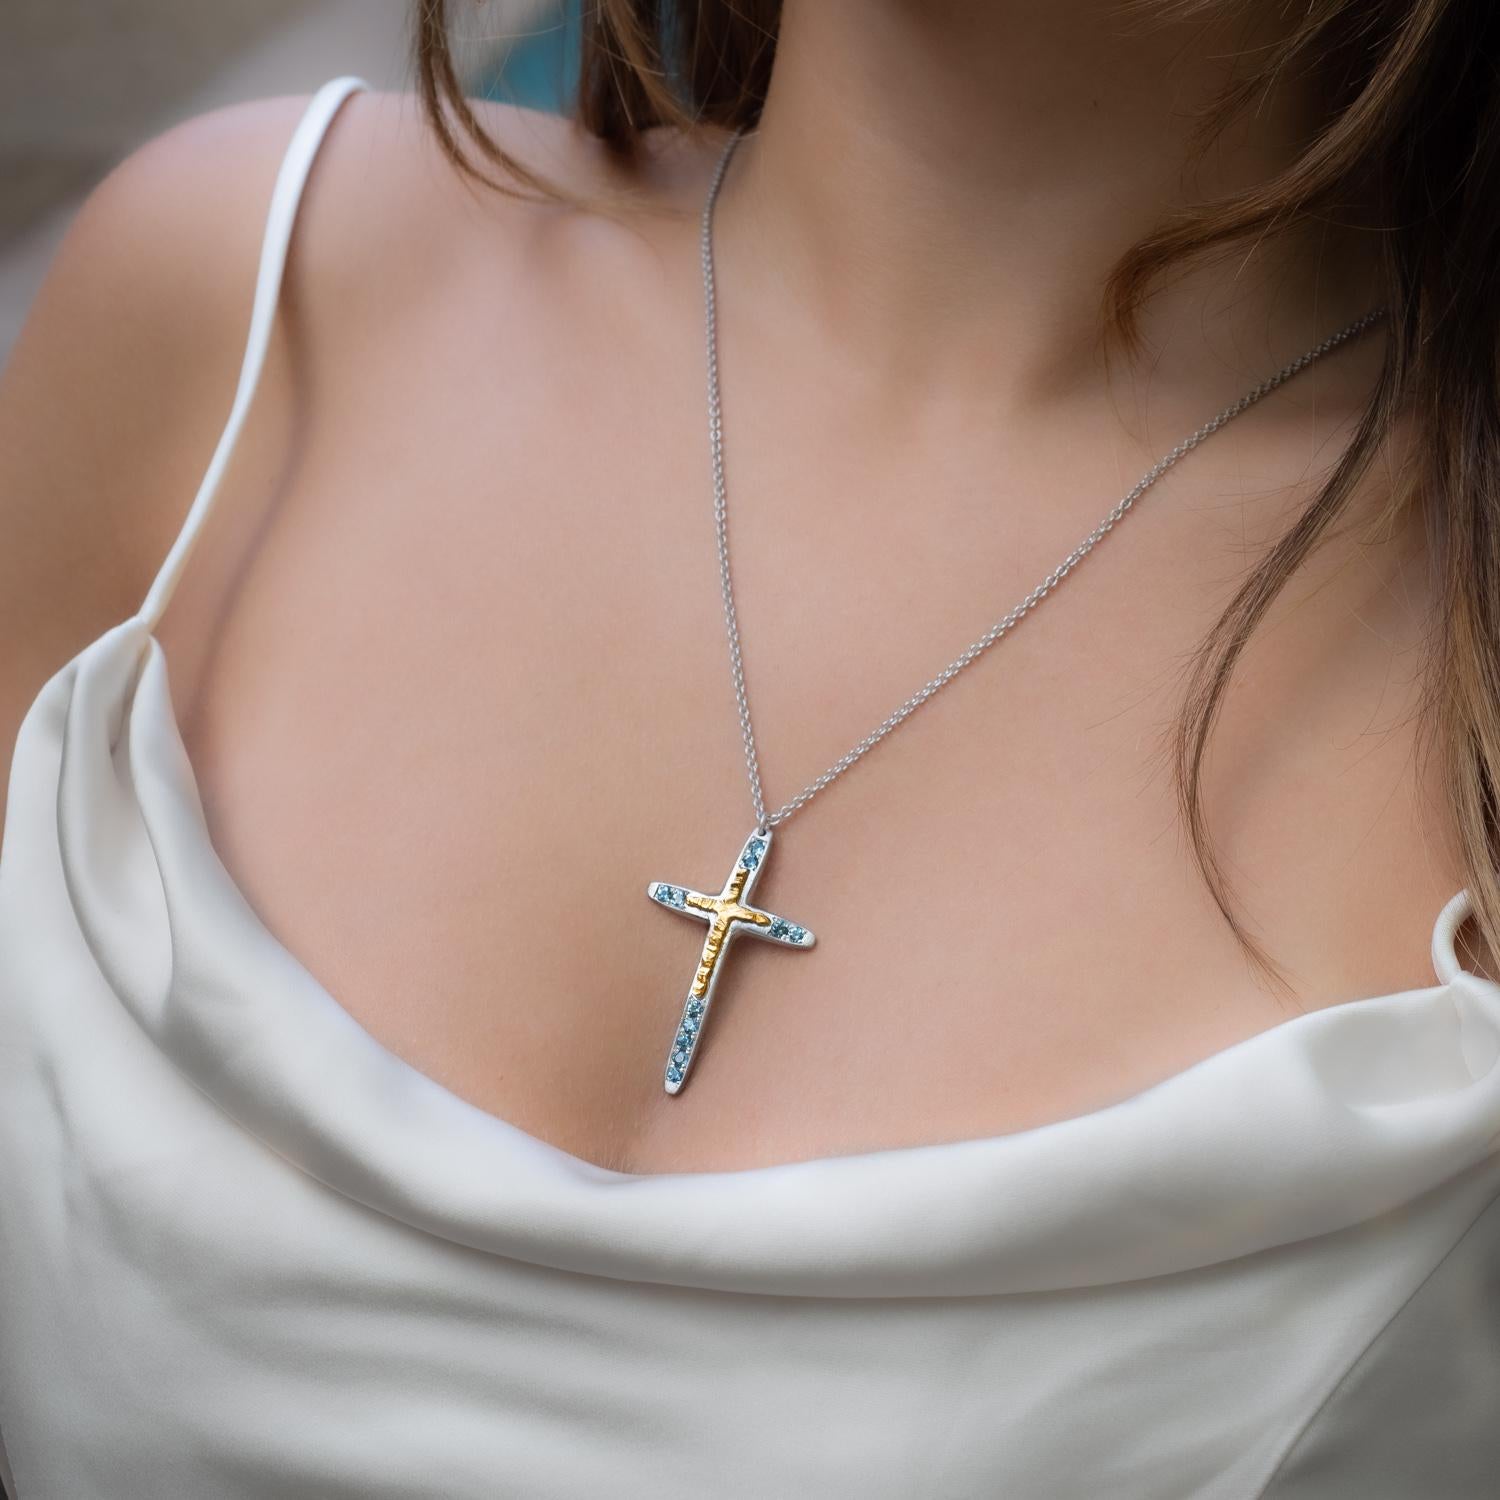 This elegant cross necklace made of 18K yellow gold and sterling silver is a beautiful combination of traditional symbolism and modern design. The cross, a timeless symbol of faith and devotion, is adorned with sparkling blue topaz, adding a touch